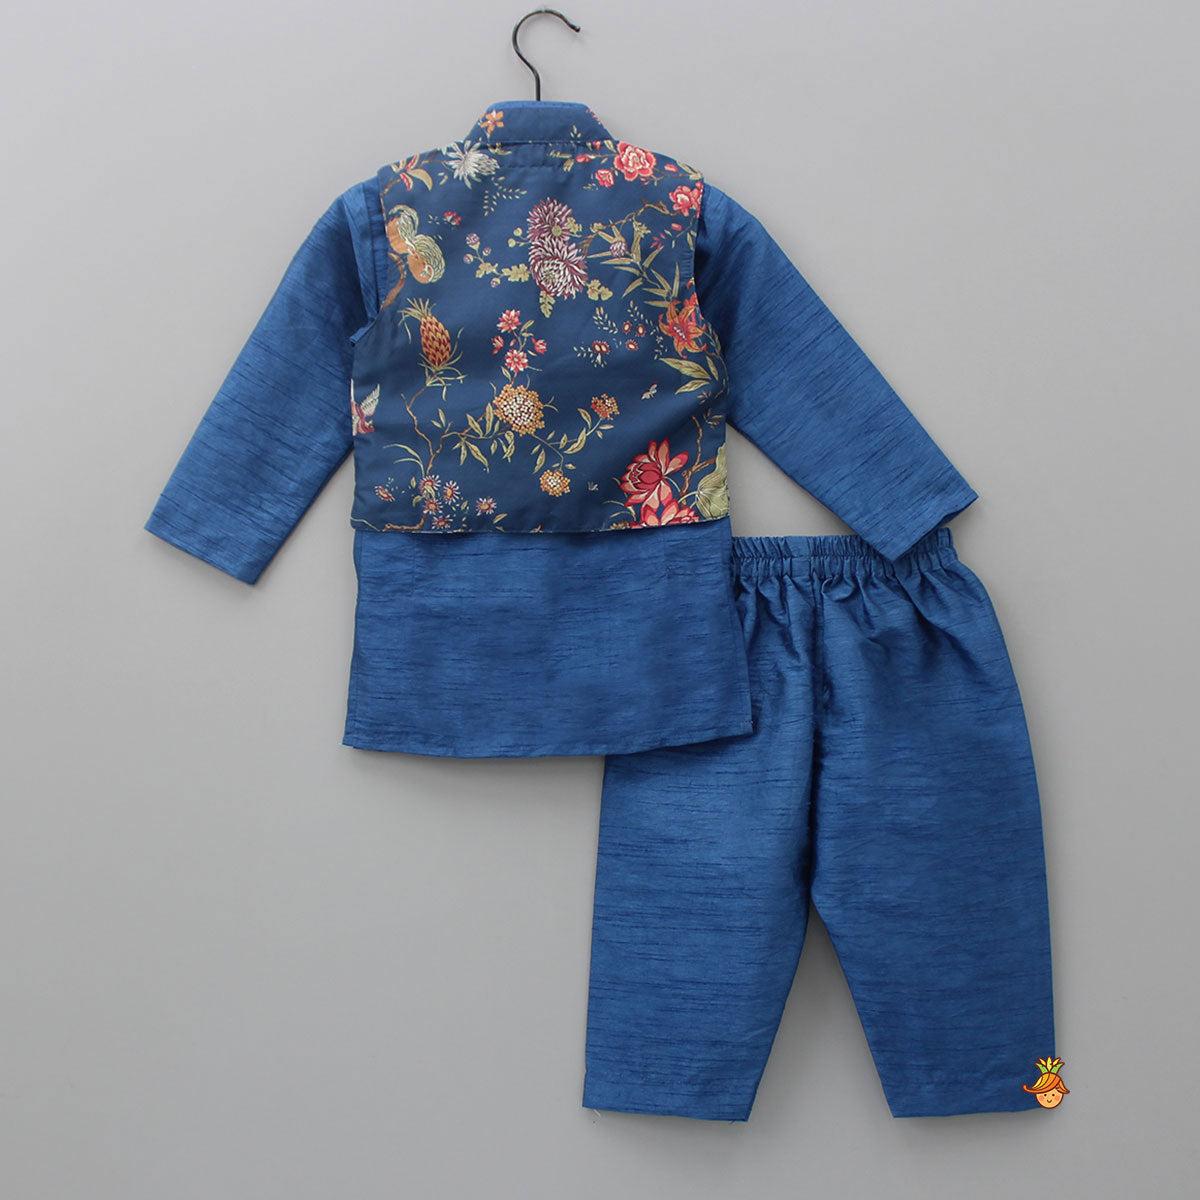 Blue Kurta With Flowers And Bird Printed Front Open Jacket And Pyjama